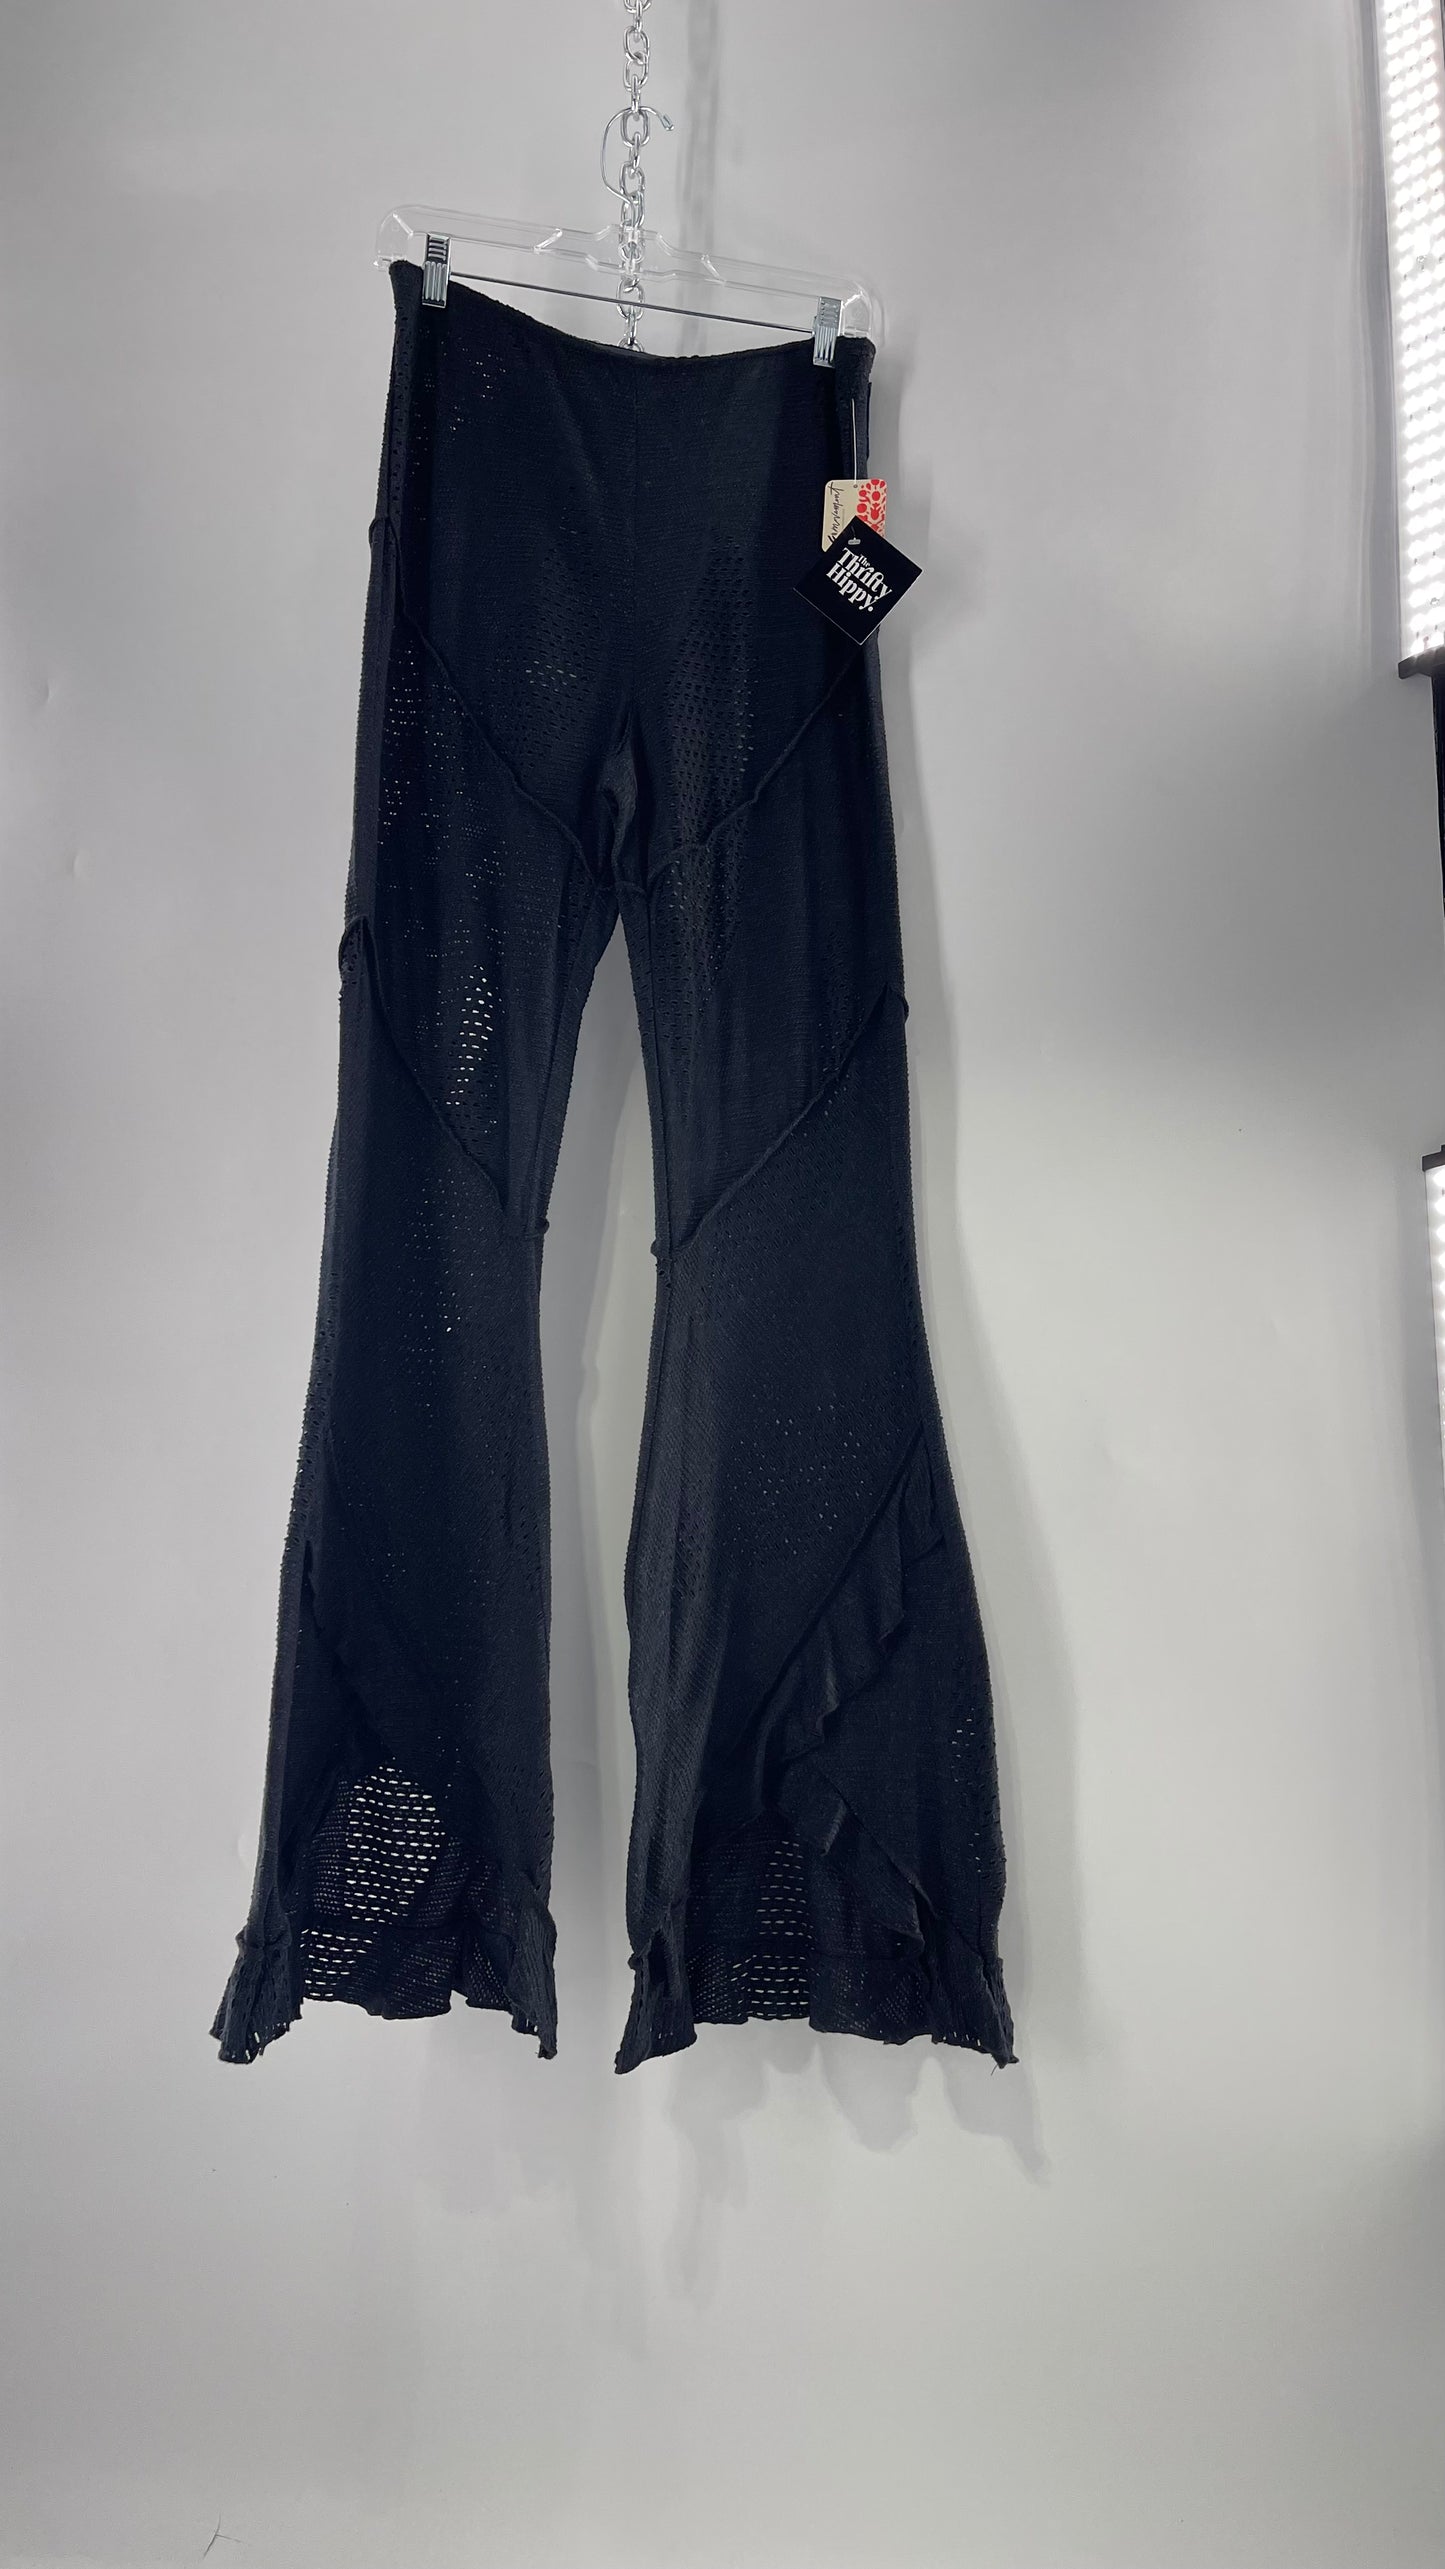 Free People  Black Midnight Grey Mixed Pattern Kickflares with High Low Hem, Exposed Seams and Distressing Tags Attached (Medium)